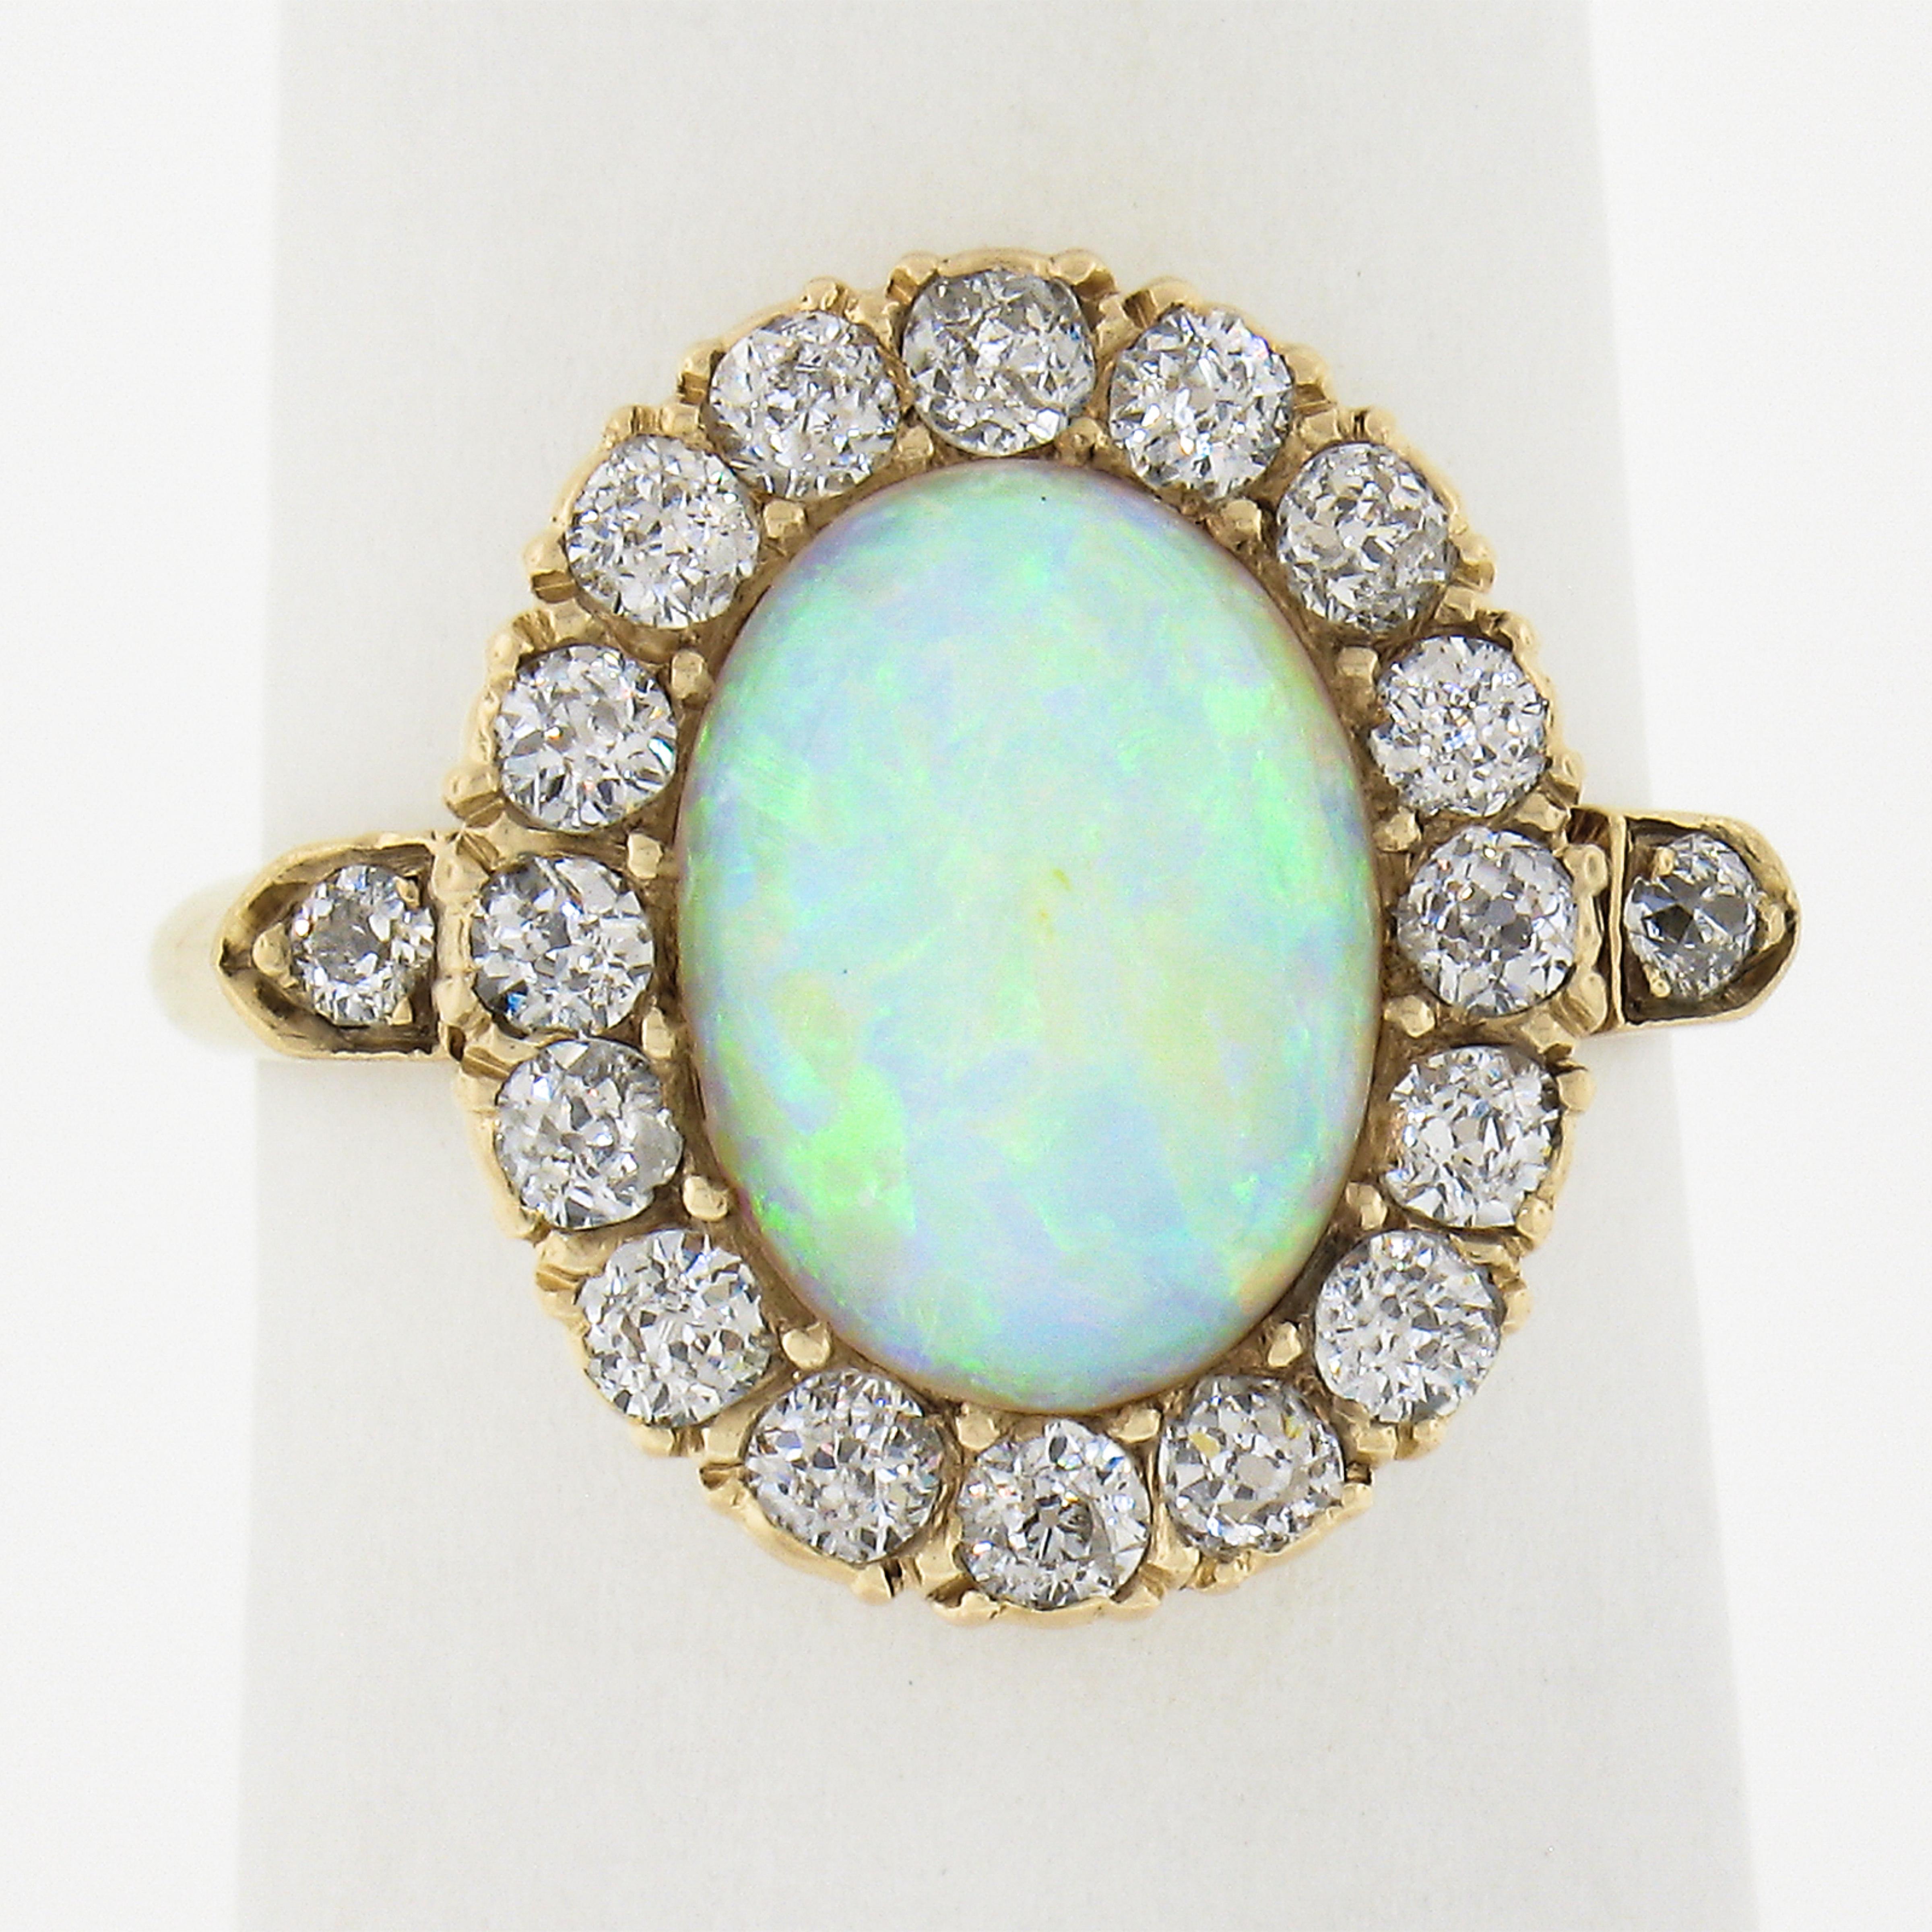 This super cute Victorian era ring is crafted in solid 14k gold and features an oval cabochon opal stone displaying vibrant blue, green and orange play throughout. The opal solitaire is surrounded by a fiery halo made from 16 pave set old European